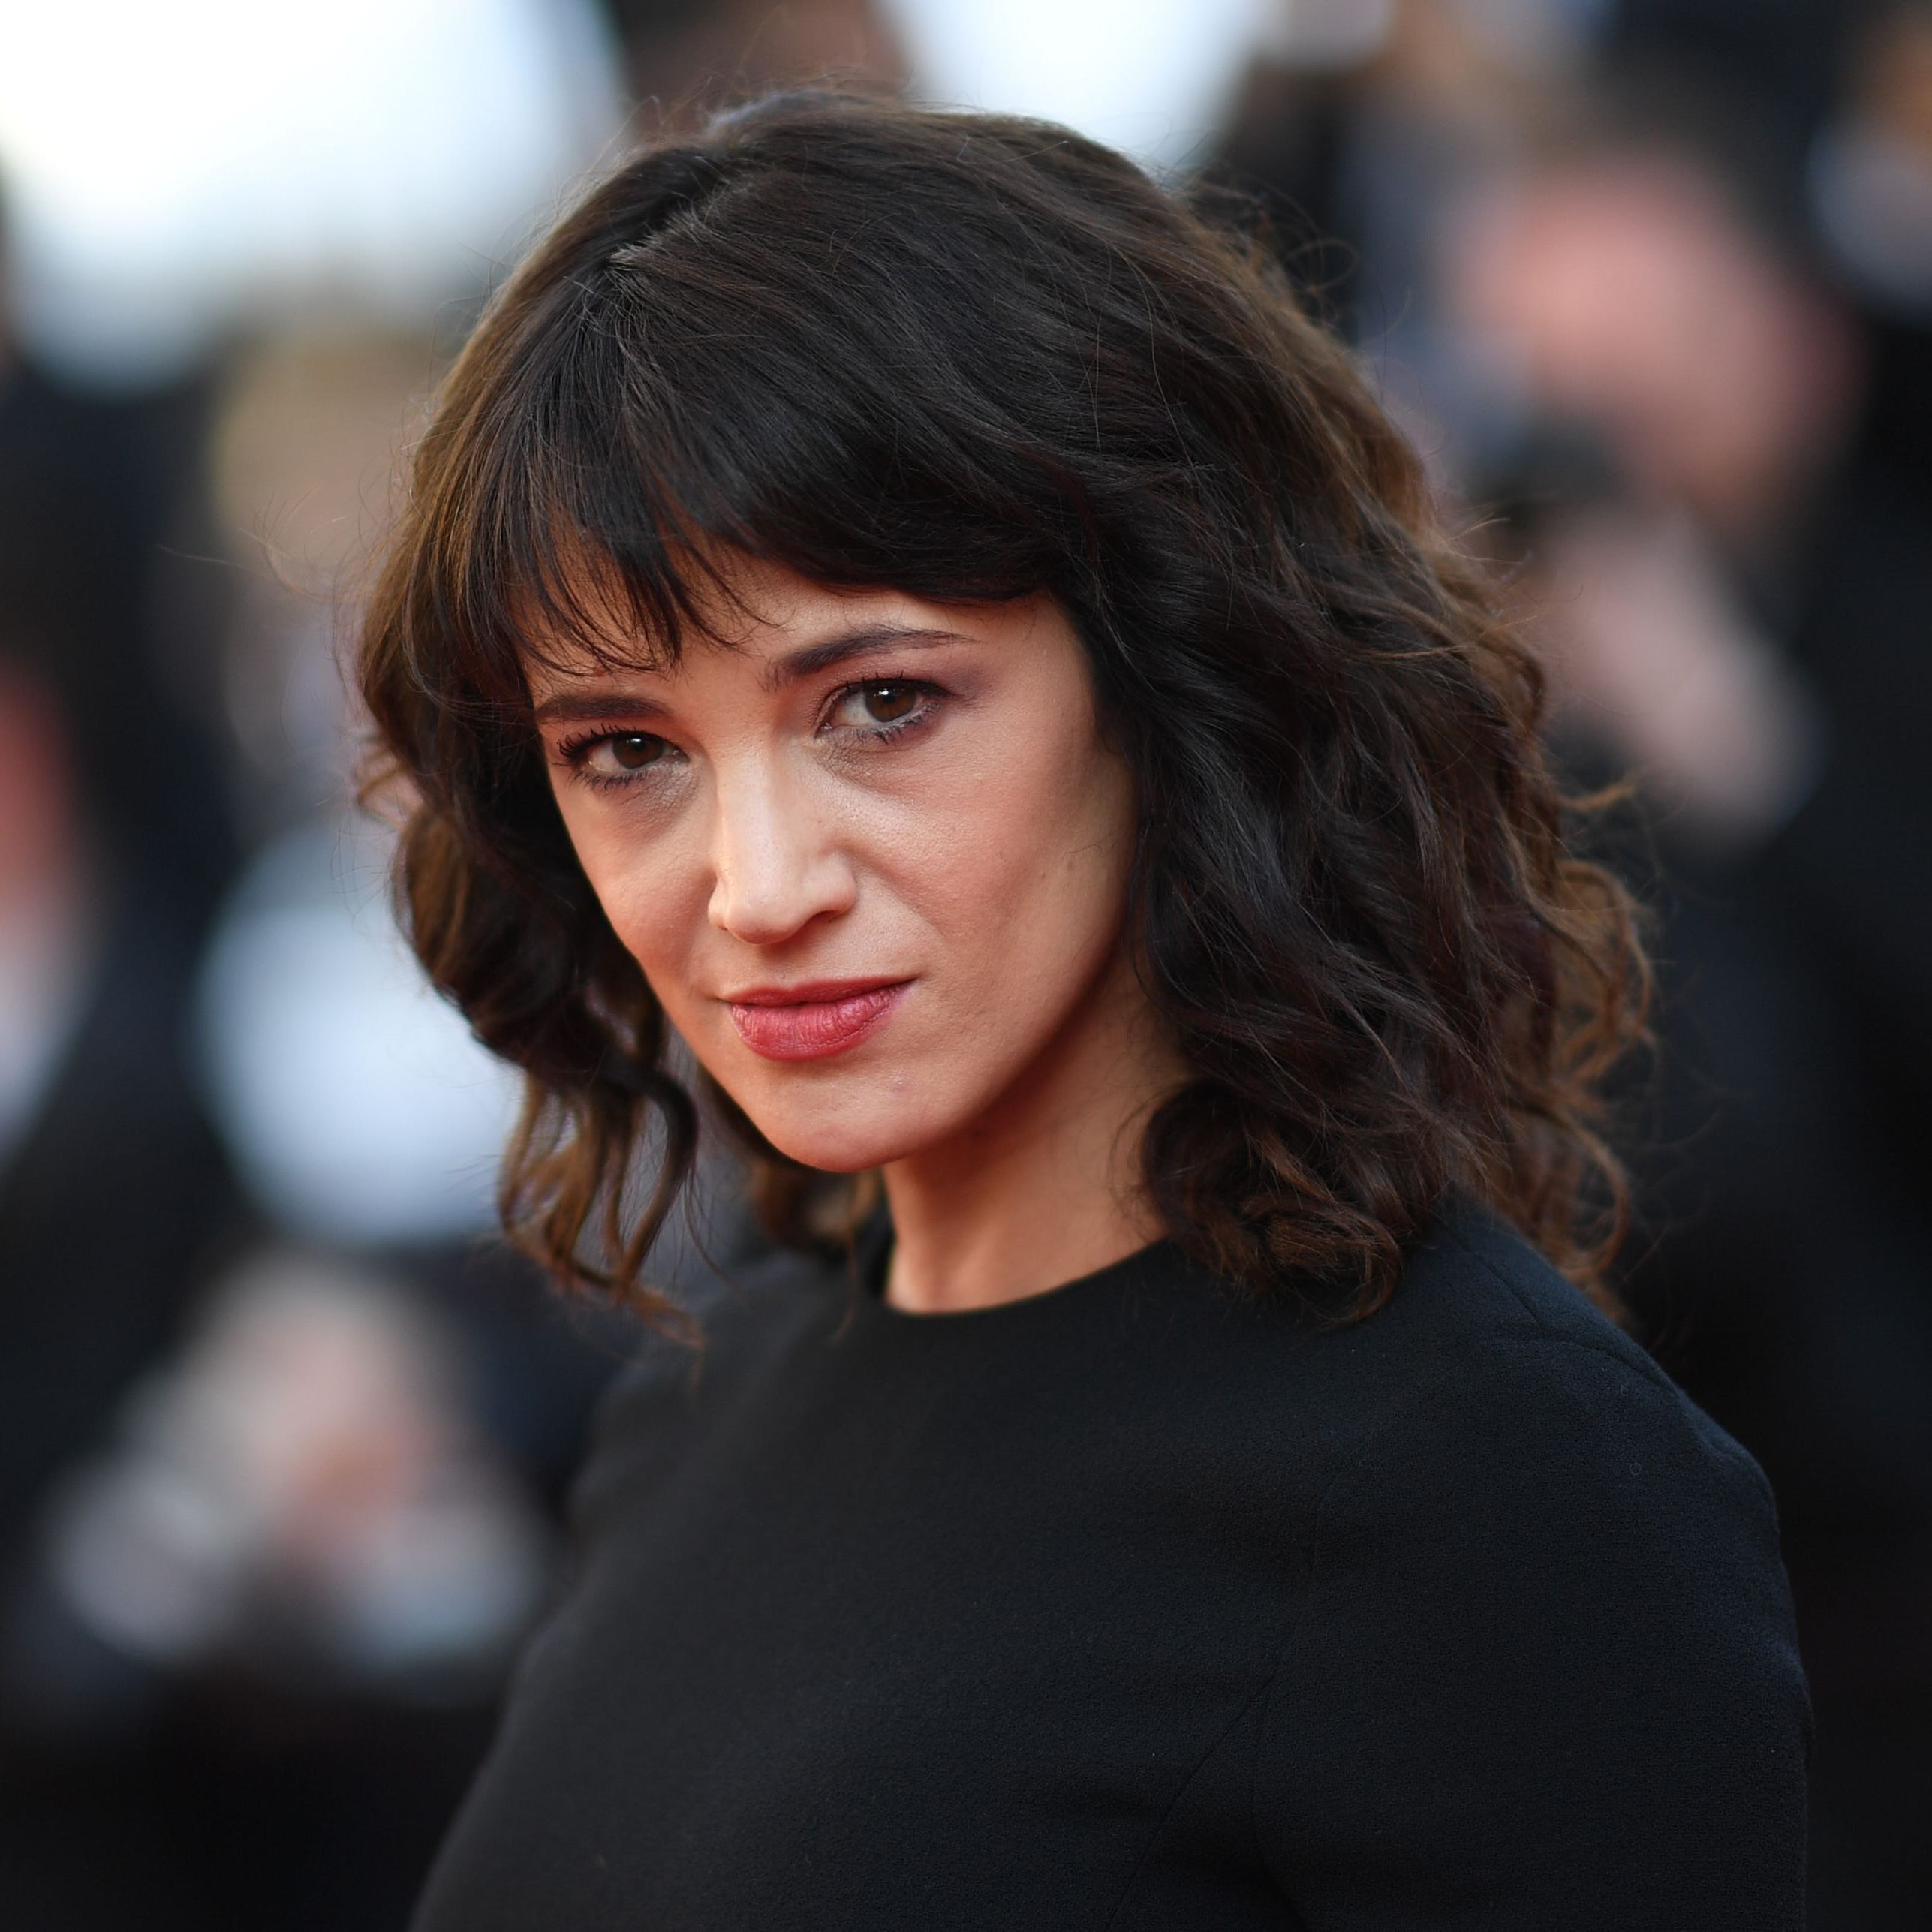 Actress Asia Argento at the Cannes Film Festival in May.